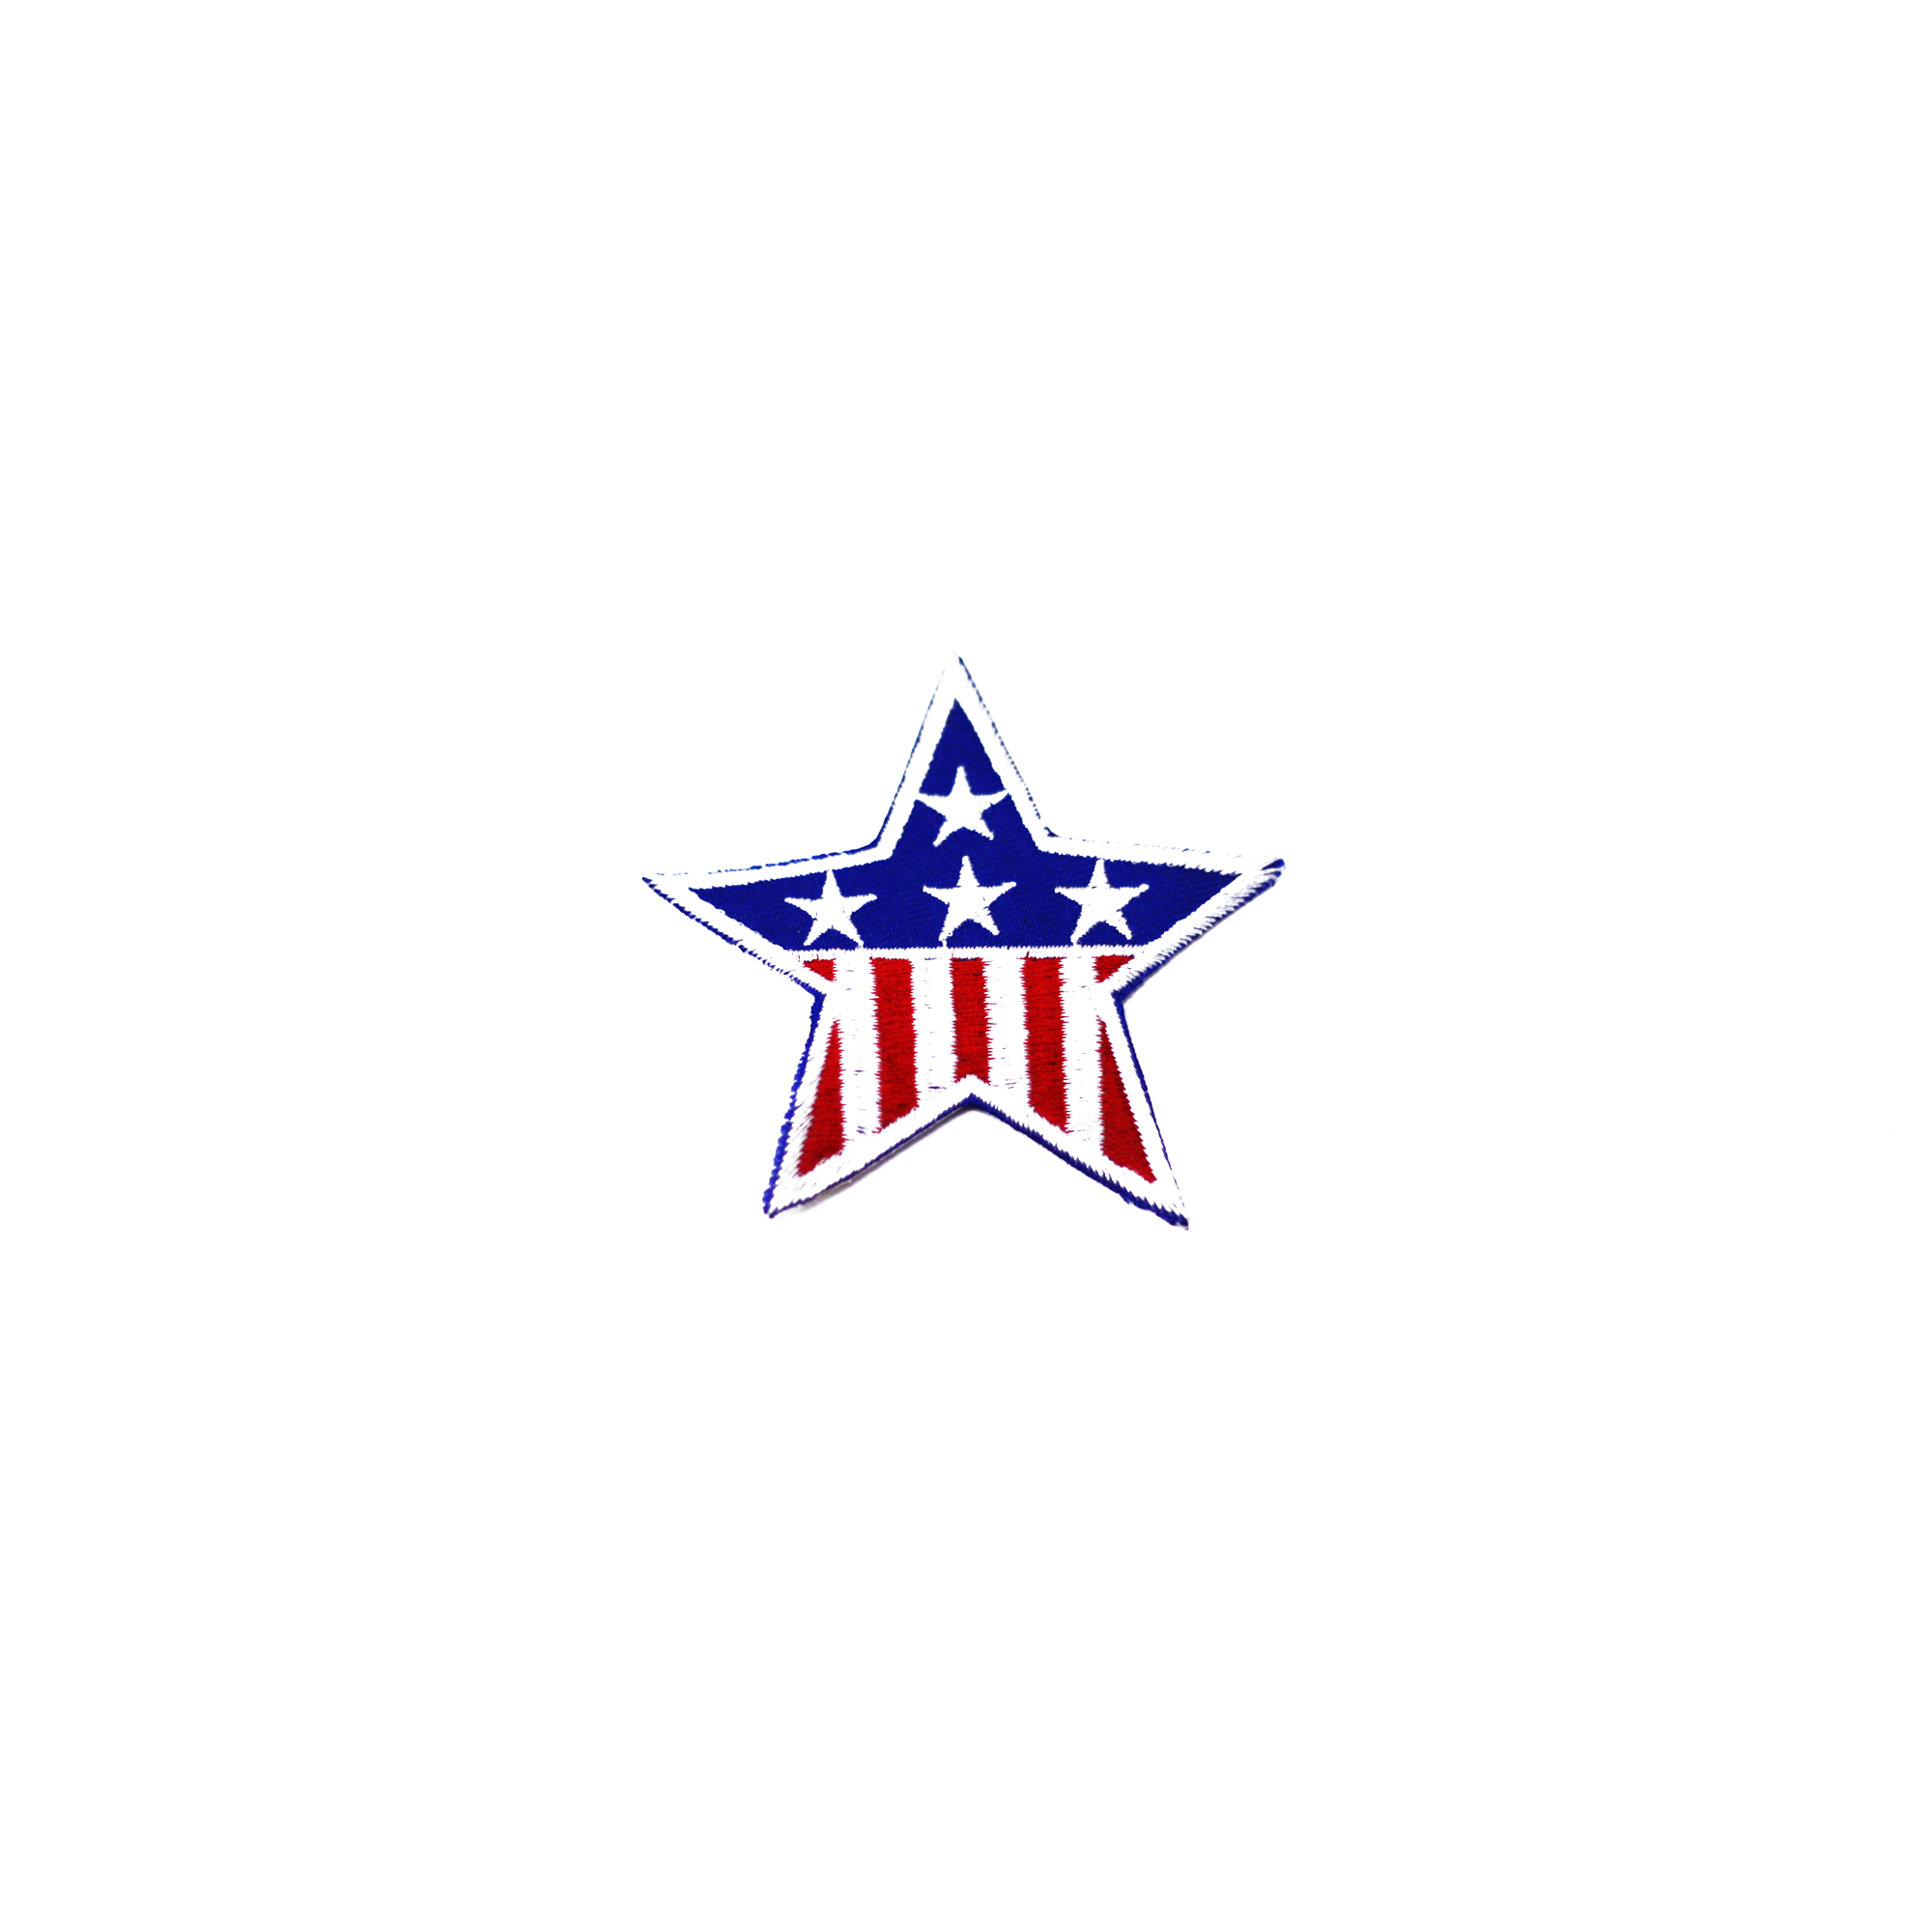 USA flag patch stock vector. Illustration of star, american - 124653416